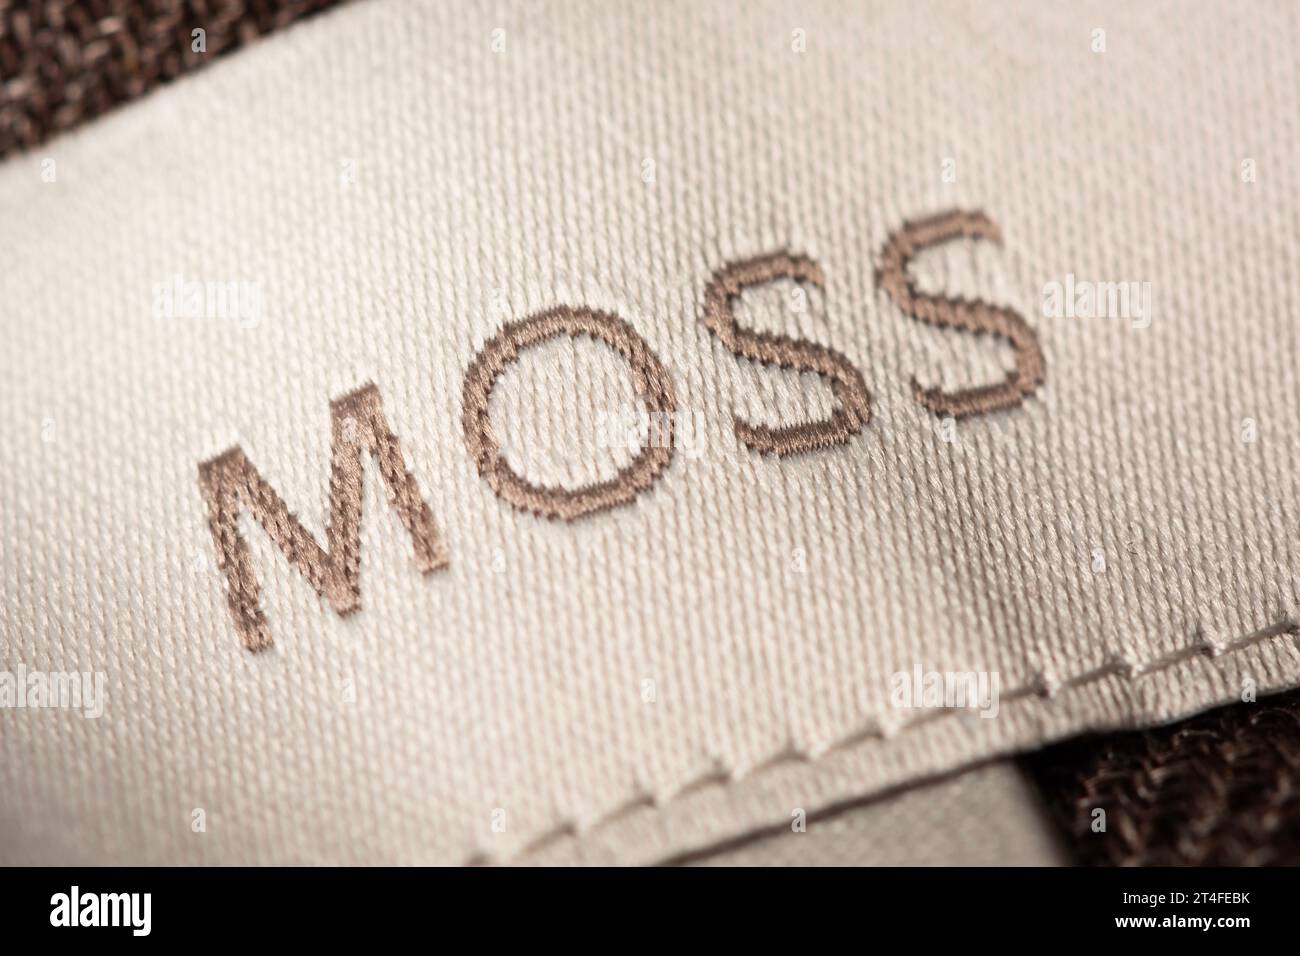 A close-up of an embroidered Moss logo as seen on a tag. Stock Photo